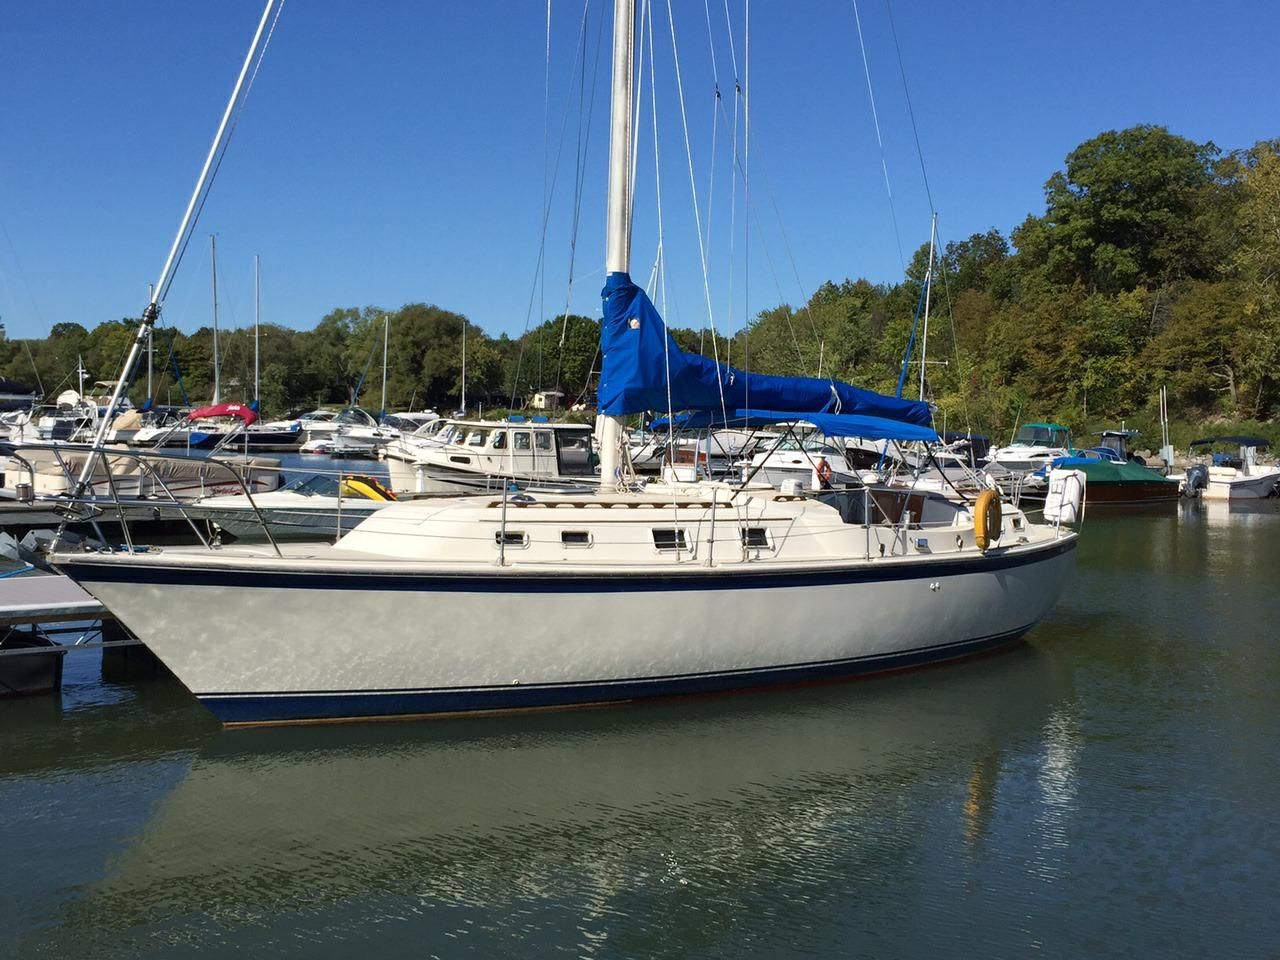 37 ft sailboat for sale